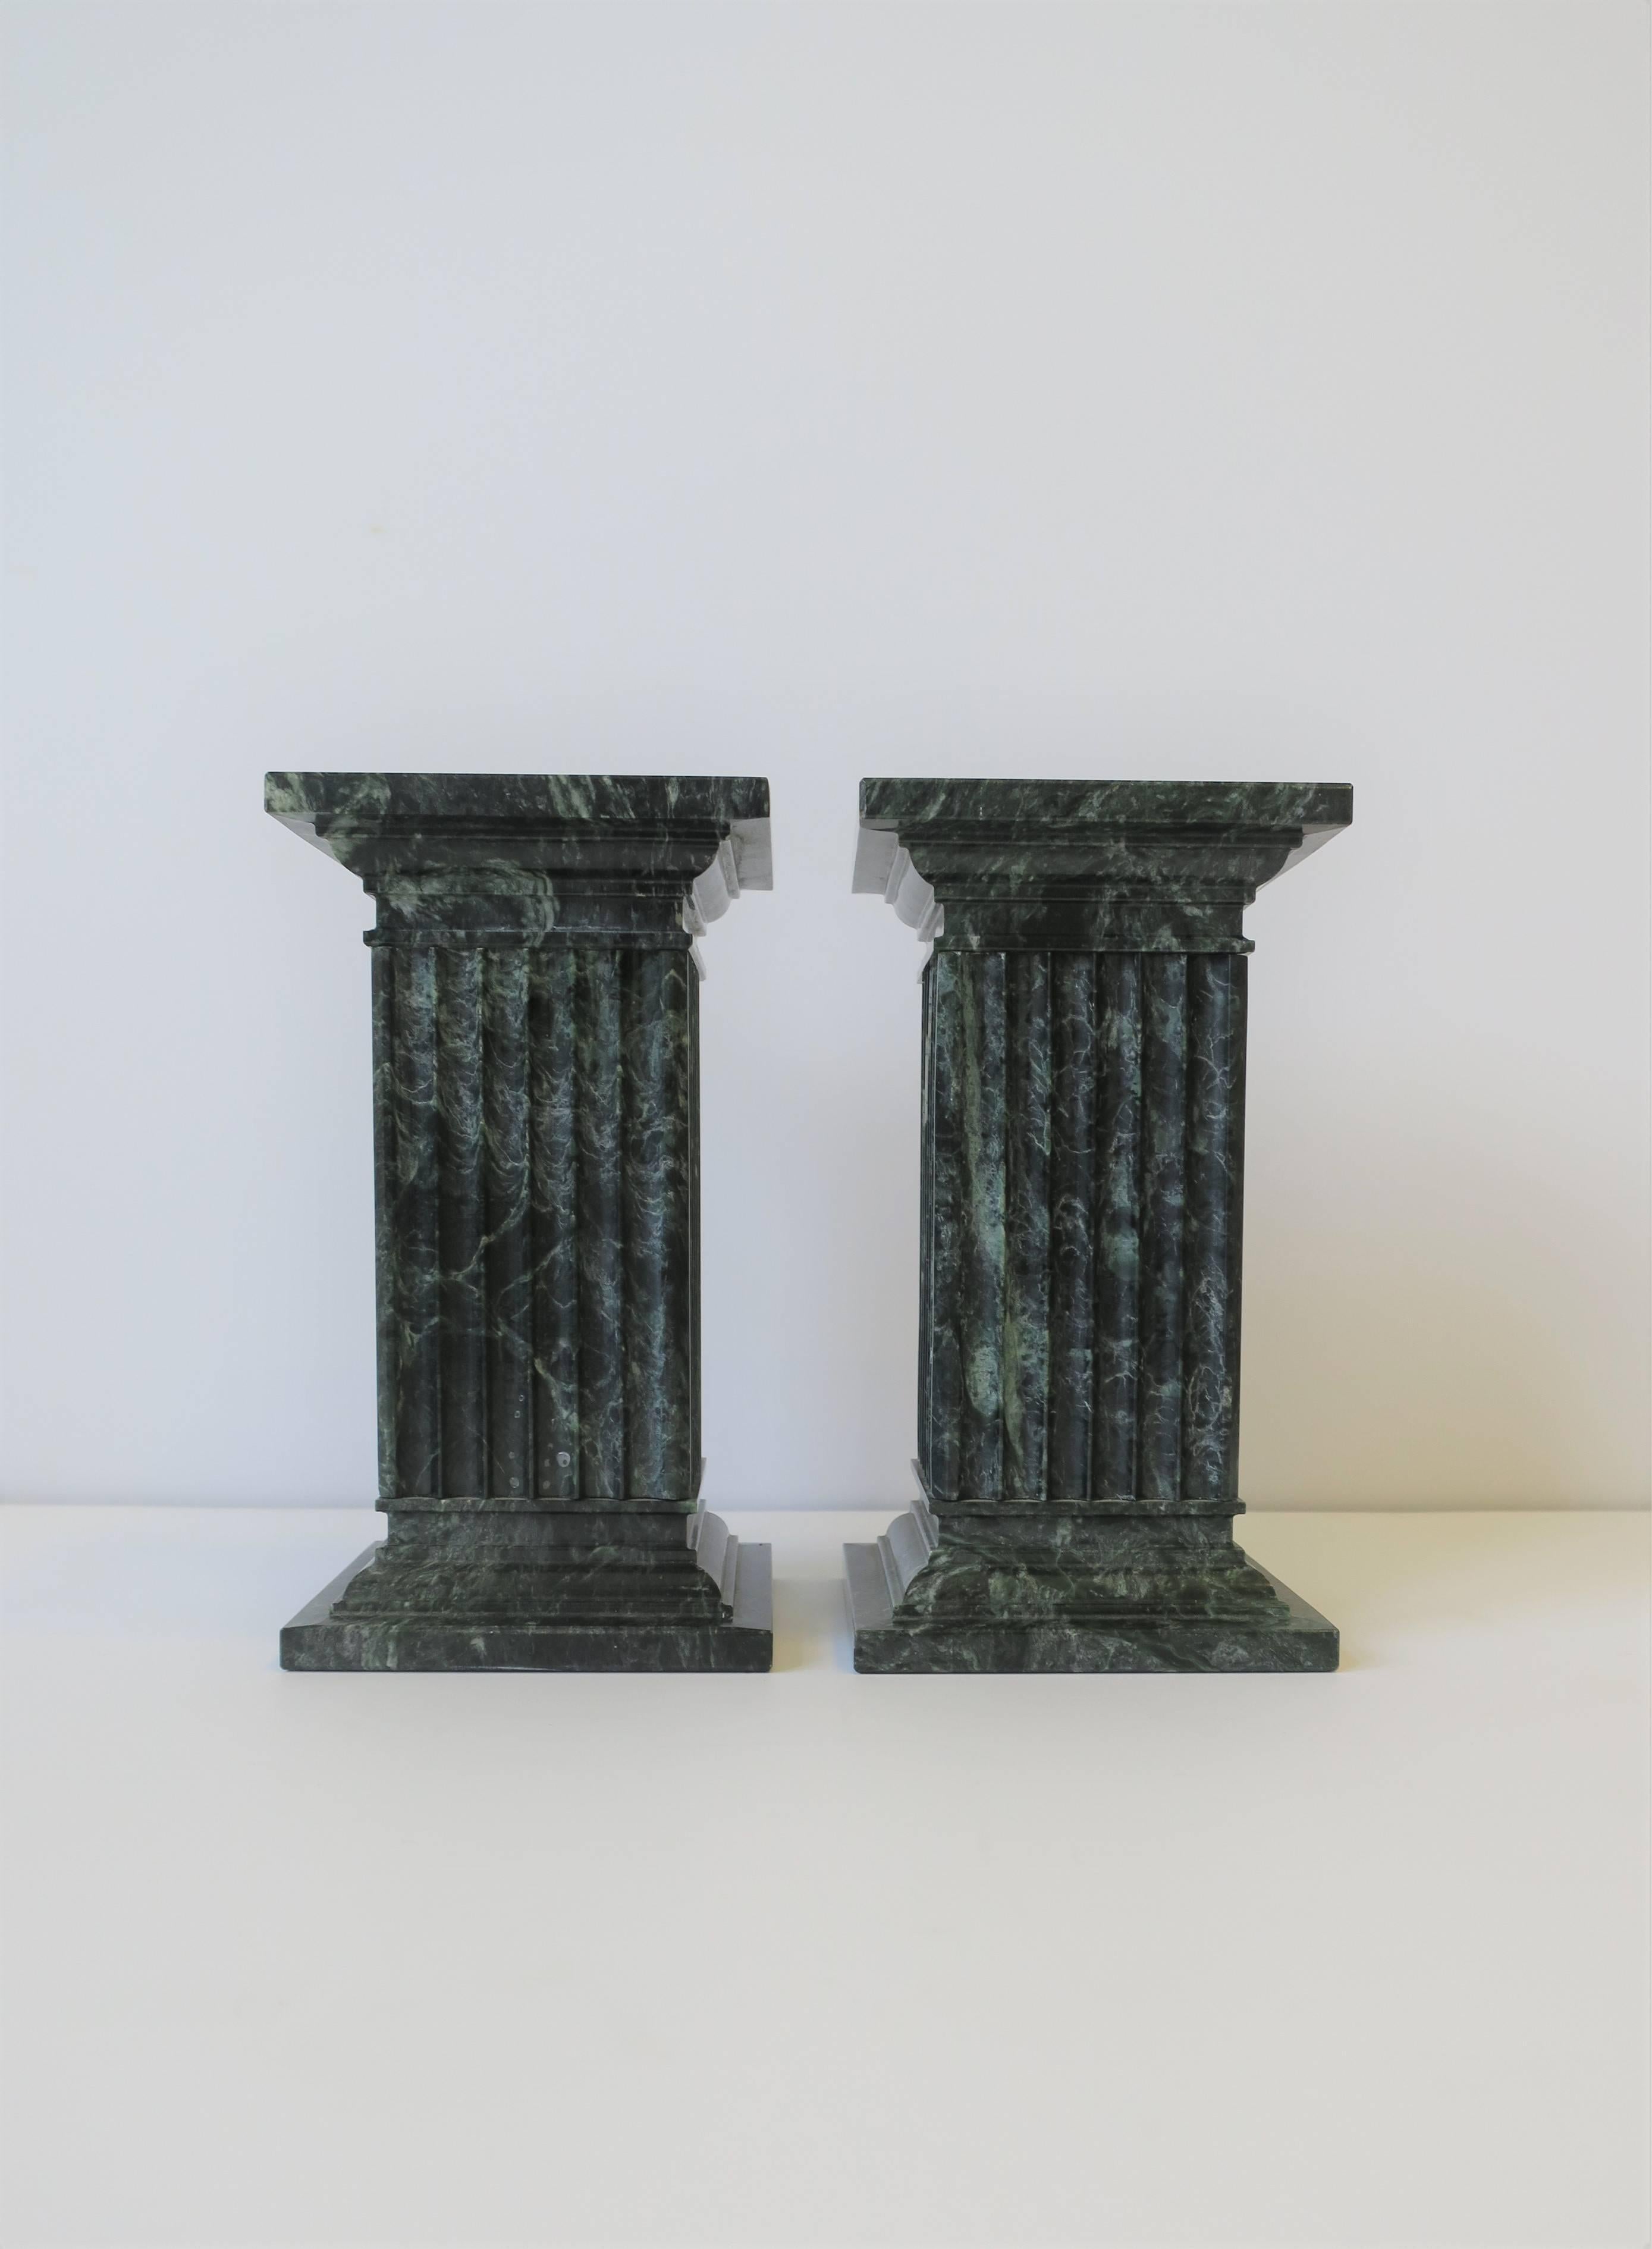 A pair of 'column' pillar green and white marble bookends, circa late 20th century. Excellent condition. Column architecture is in the style of the 'fluted non-tapered square'.

Each measure: 6